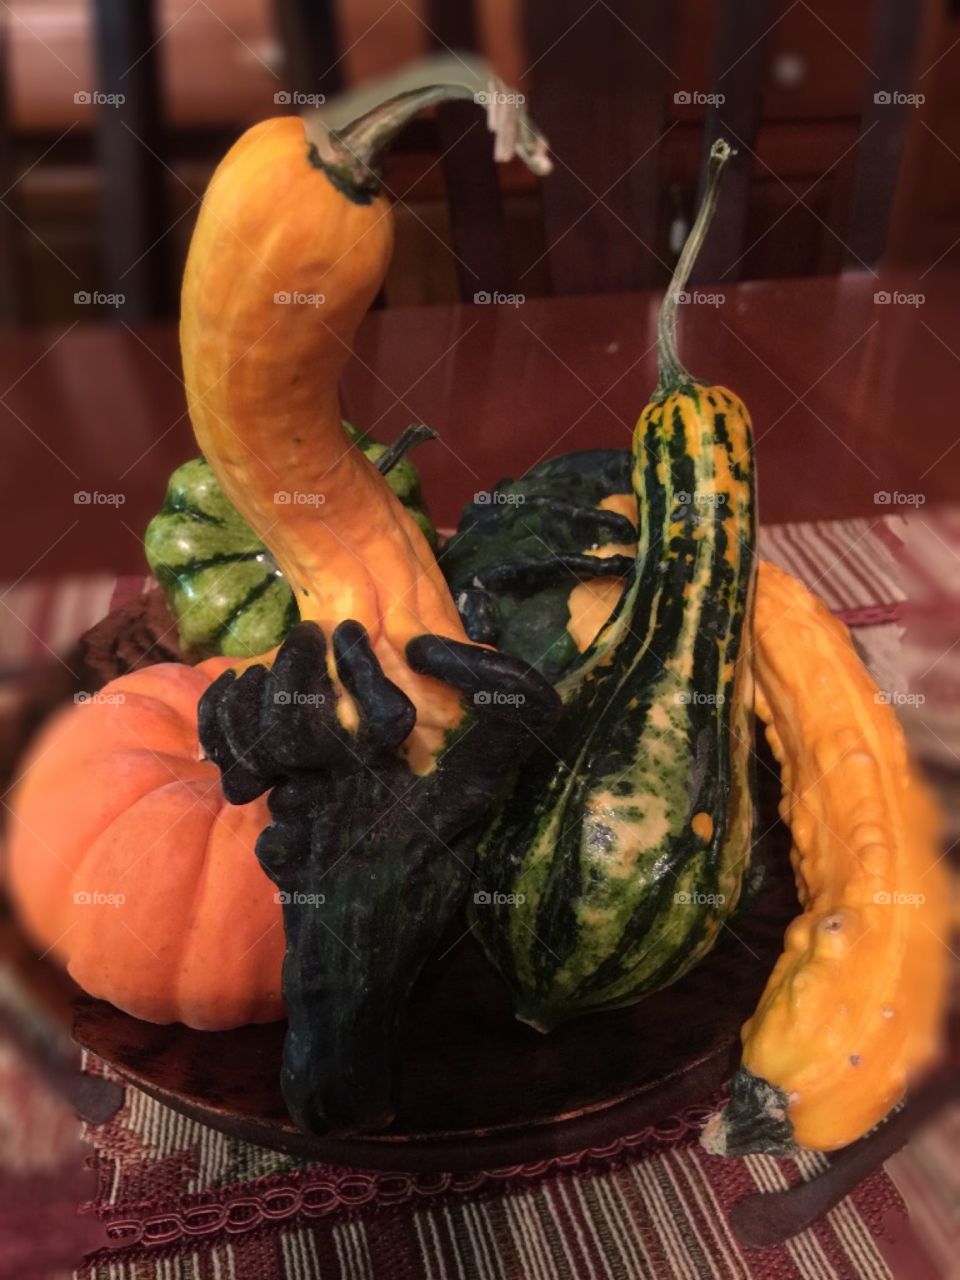 The Gourds of Fall. Couldn't help but note two of the Gourds appear to be grasped by monster hands! What do you think?